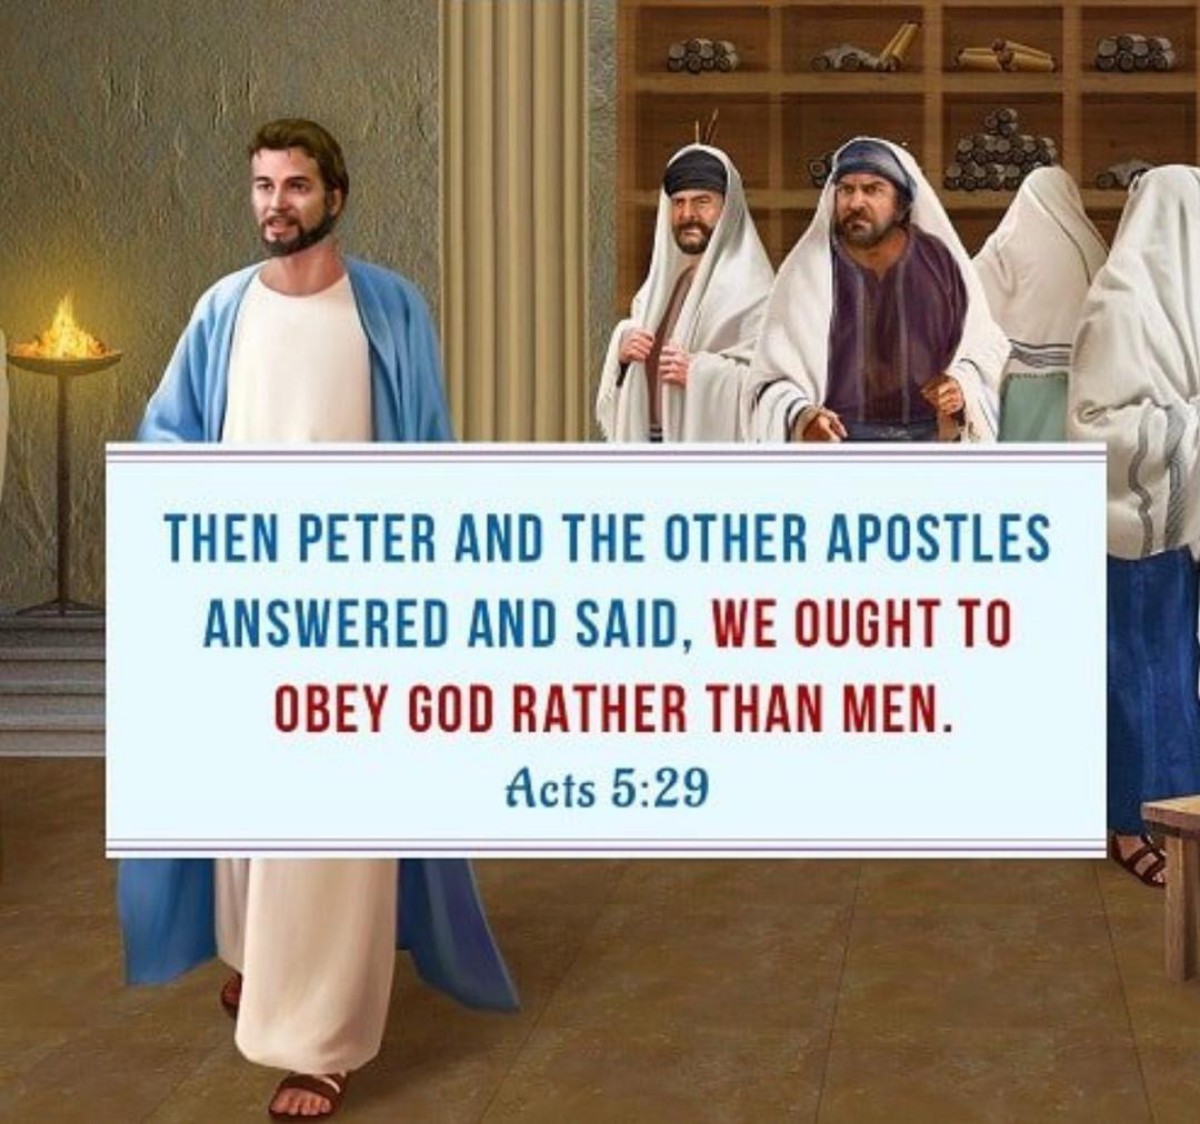 We must Obey God Rather Than Men